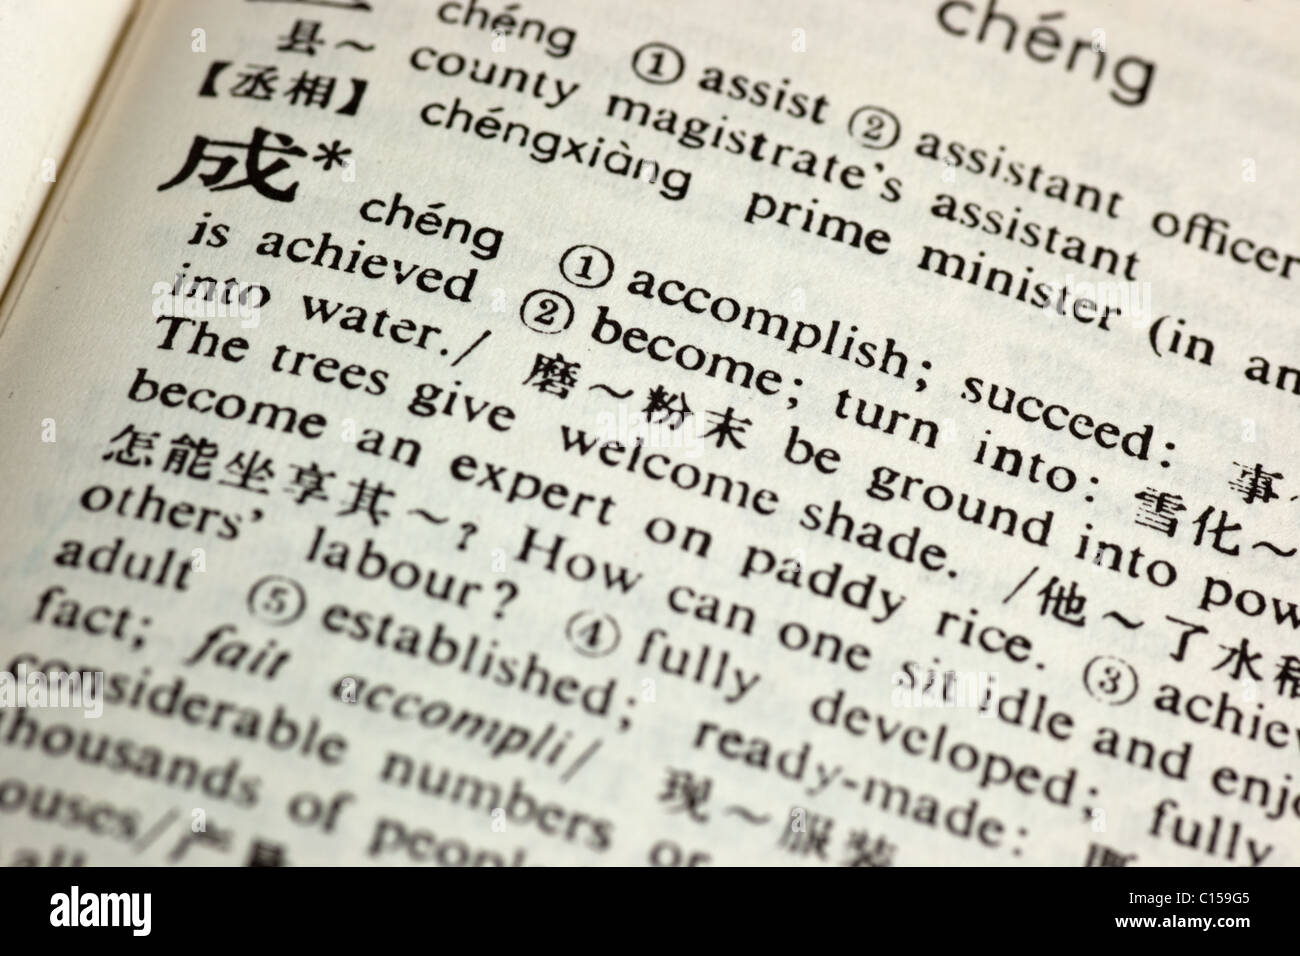 Succeed written in Chinese in a Chinese-English translation dictionary Stock Photo